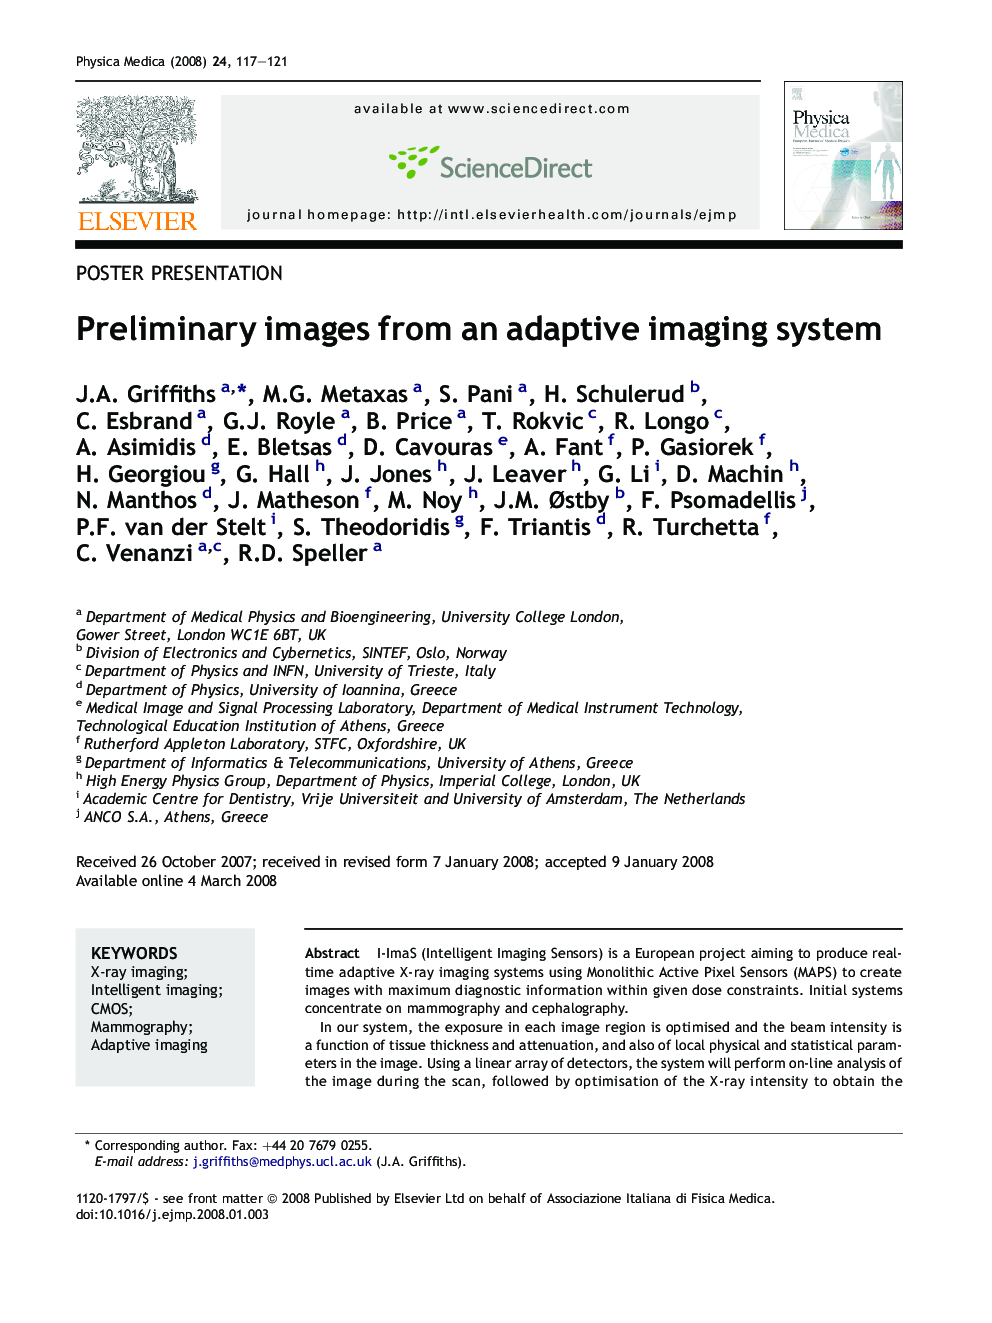 Preliminary images from an adaptive imaging system